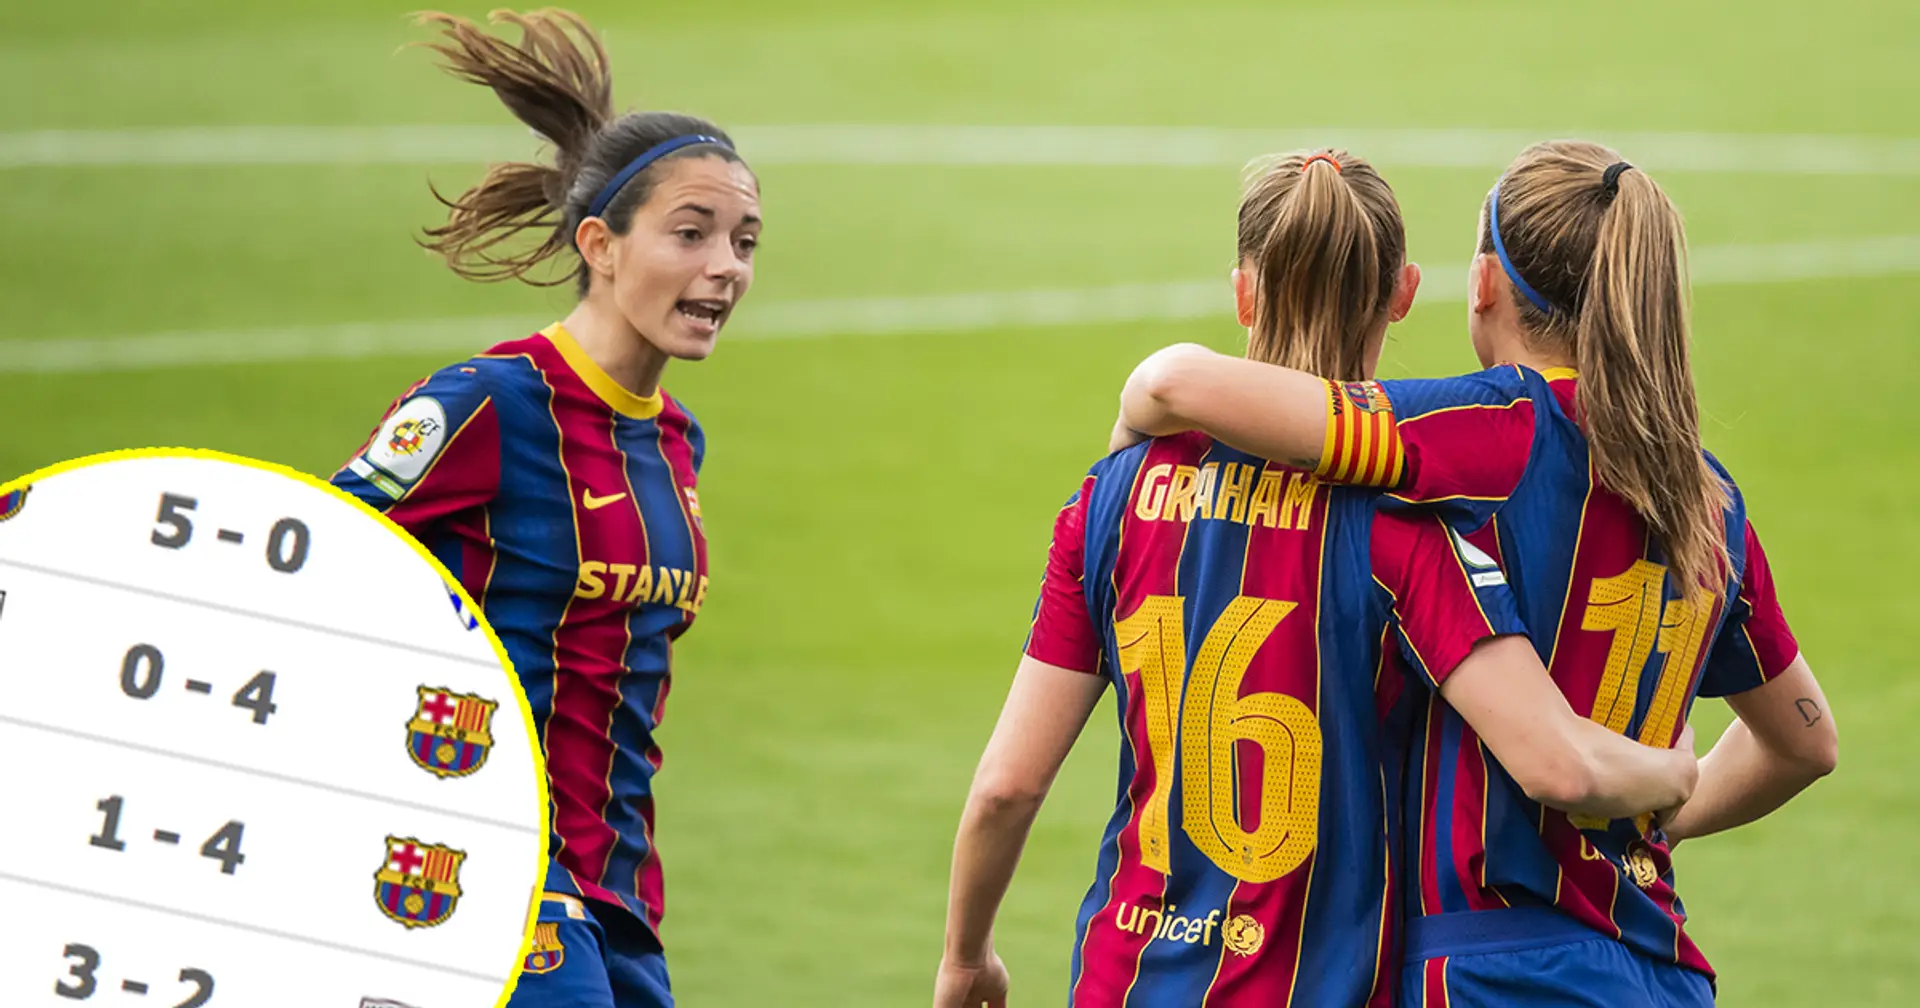 Barca Femeni play 3 games in 5 days, win them all with 13-1 goal difference